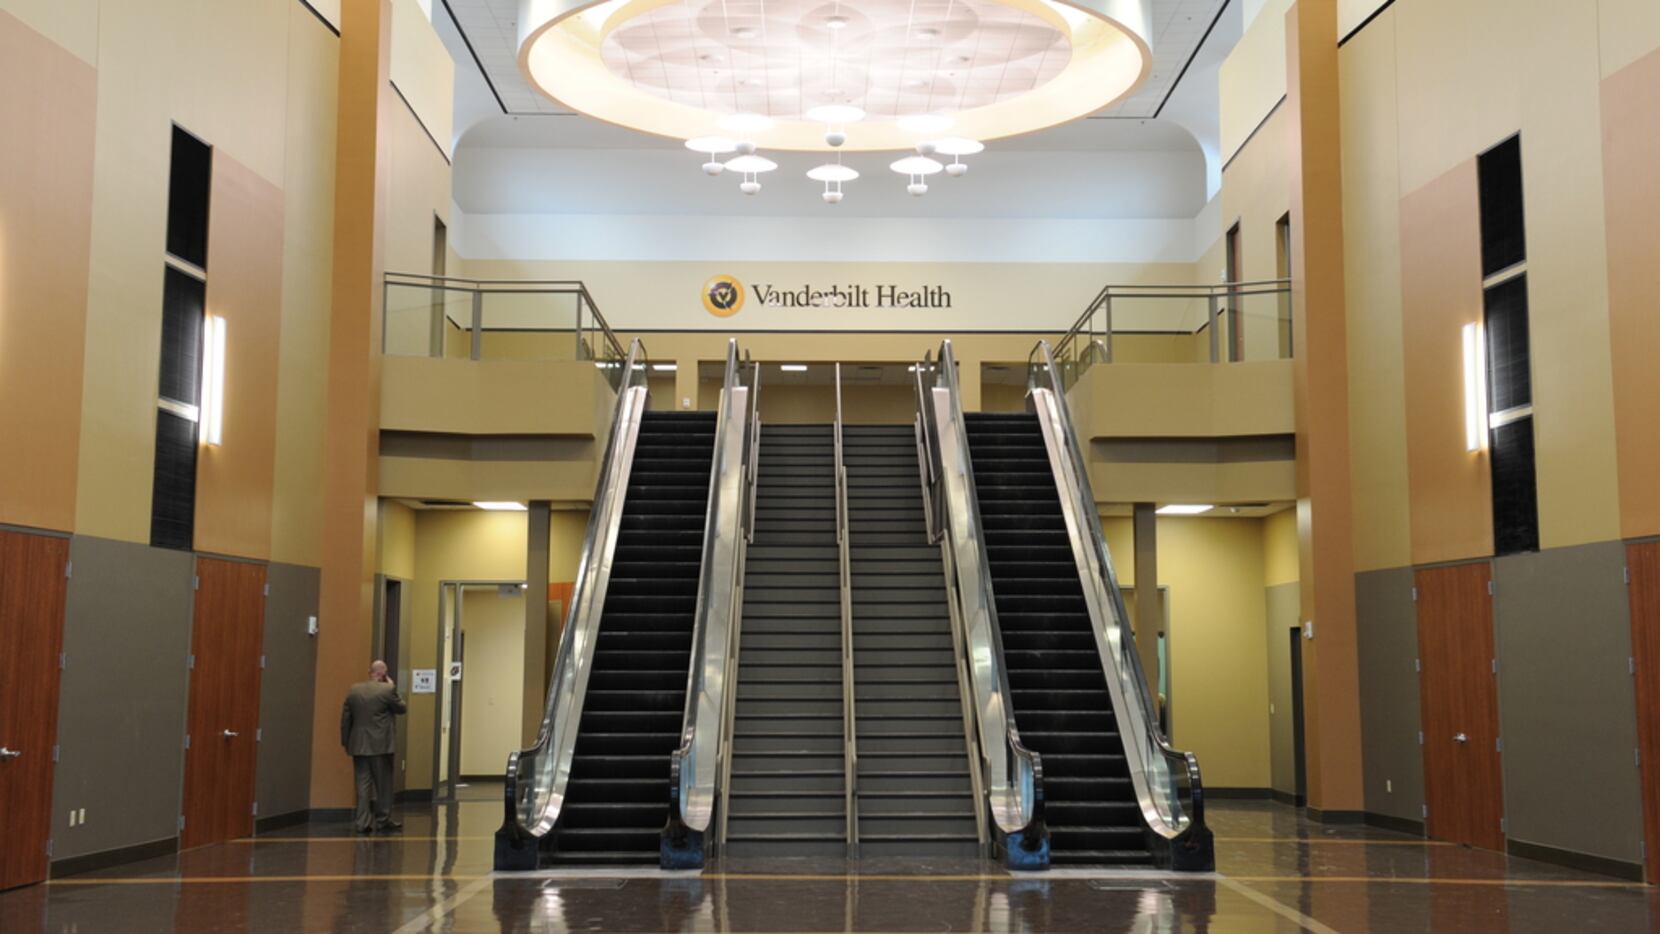 Malls are filling their empty spaces with doctor's offices